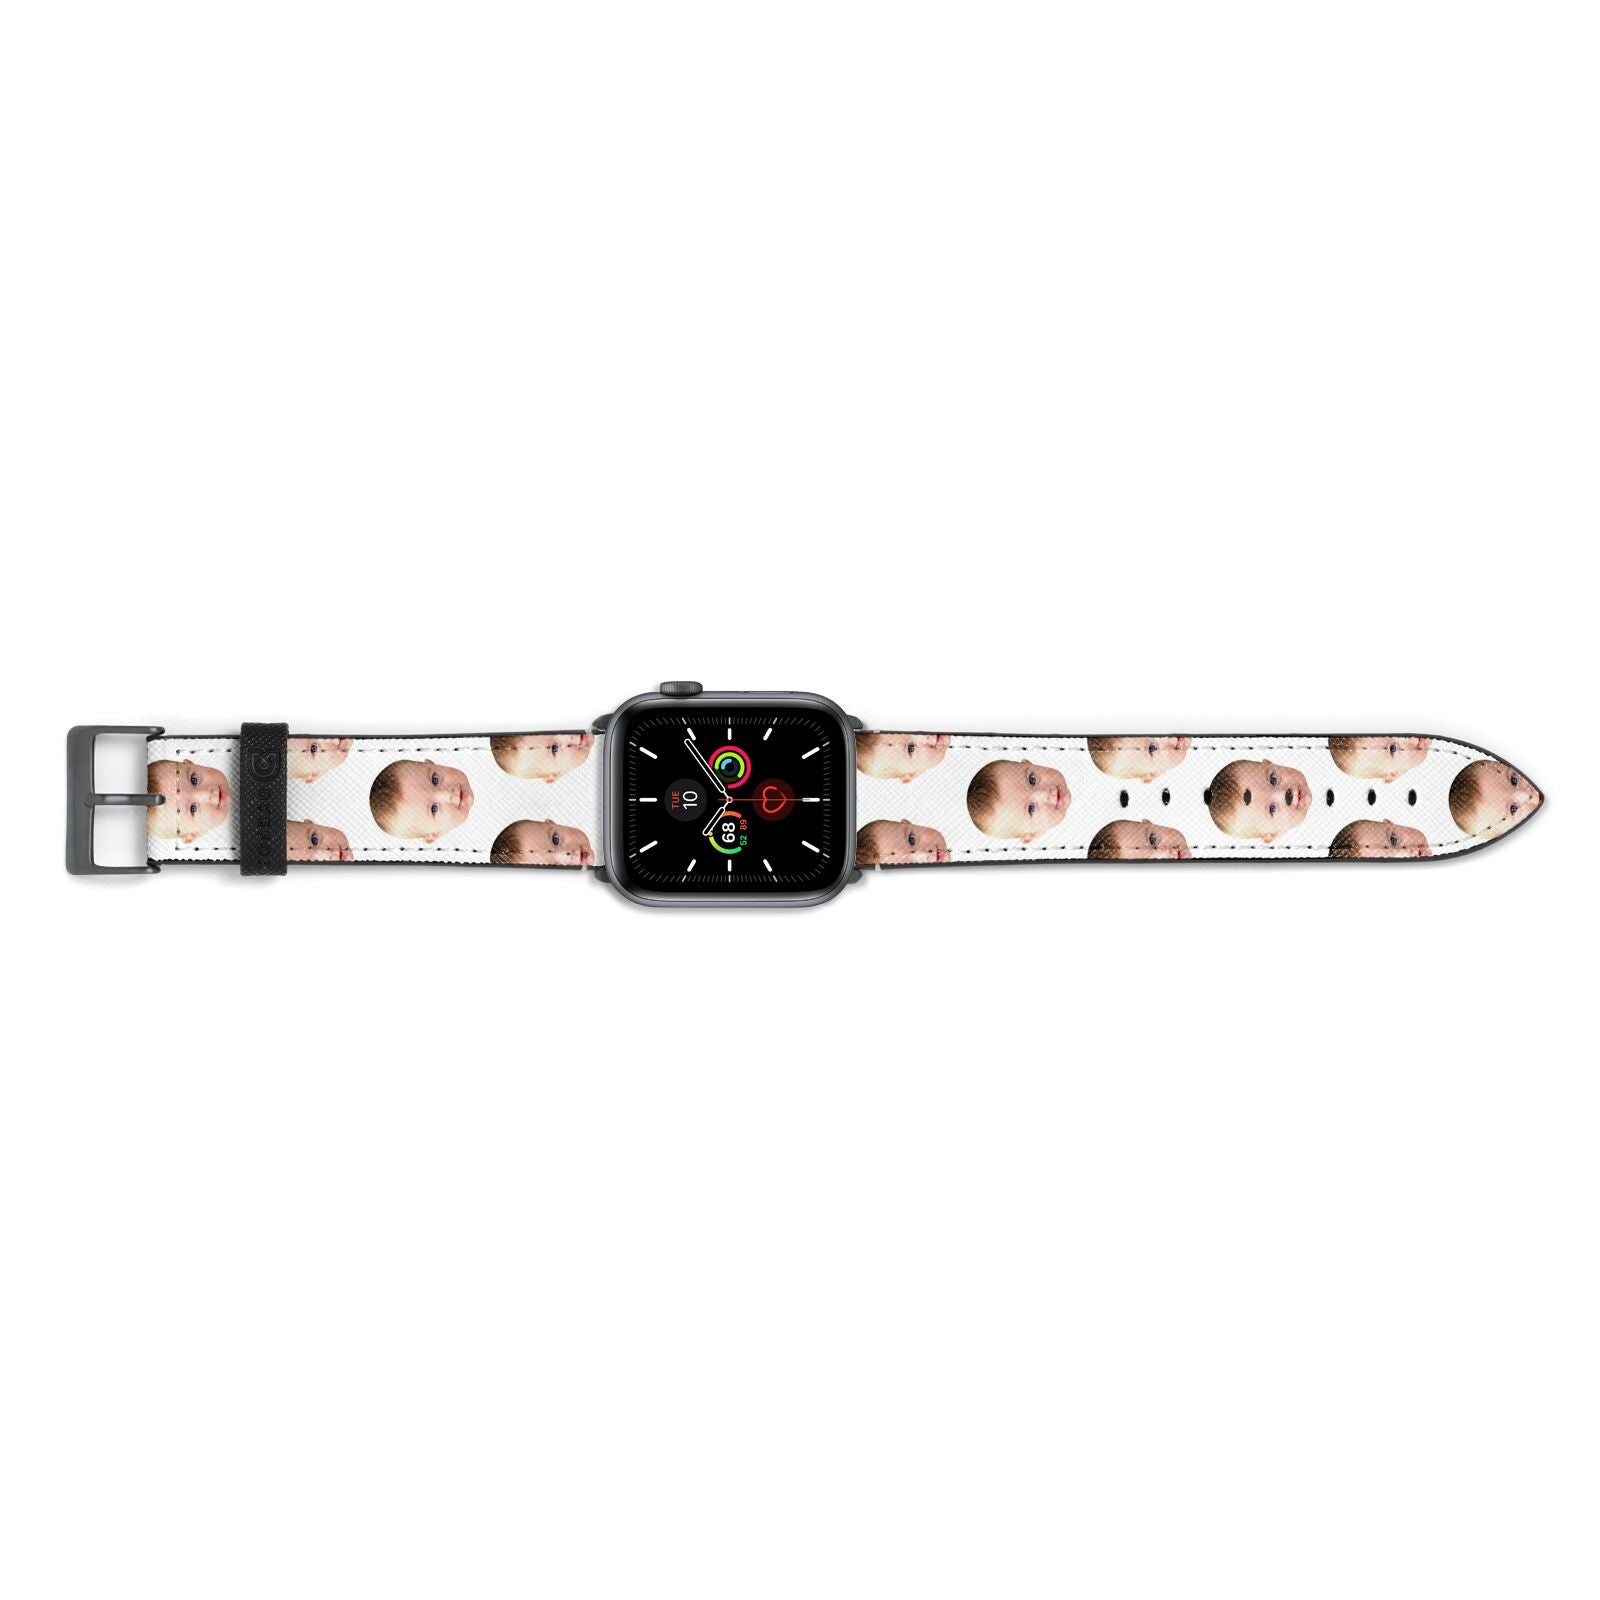 Baby Face Apple Watch Strap Landscape Image Space Grey Hardware